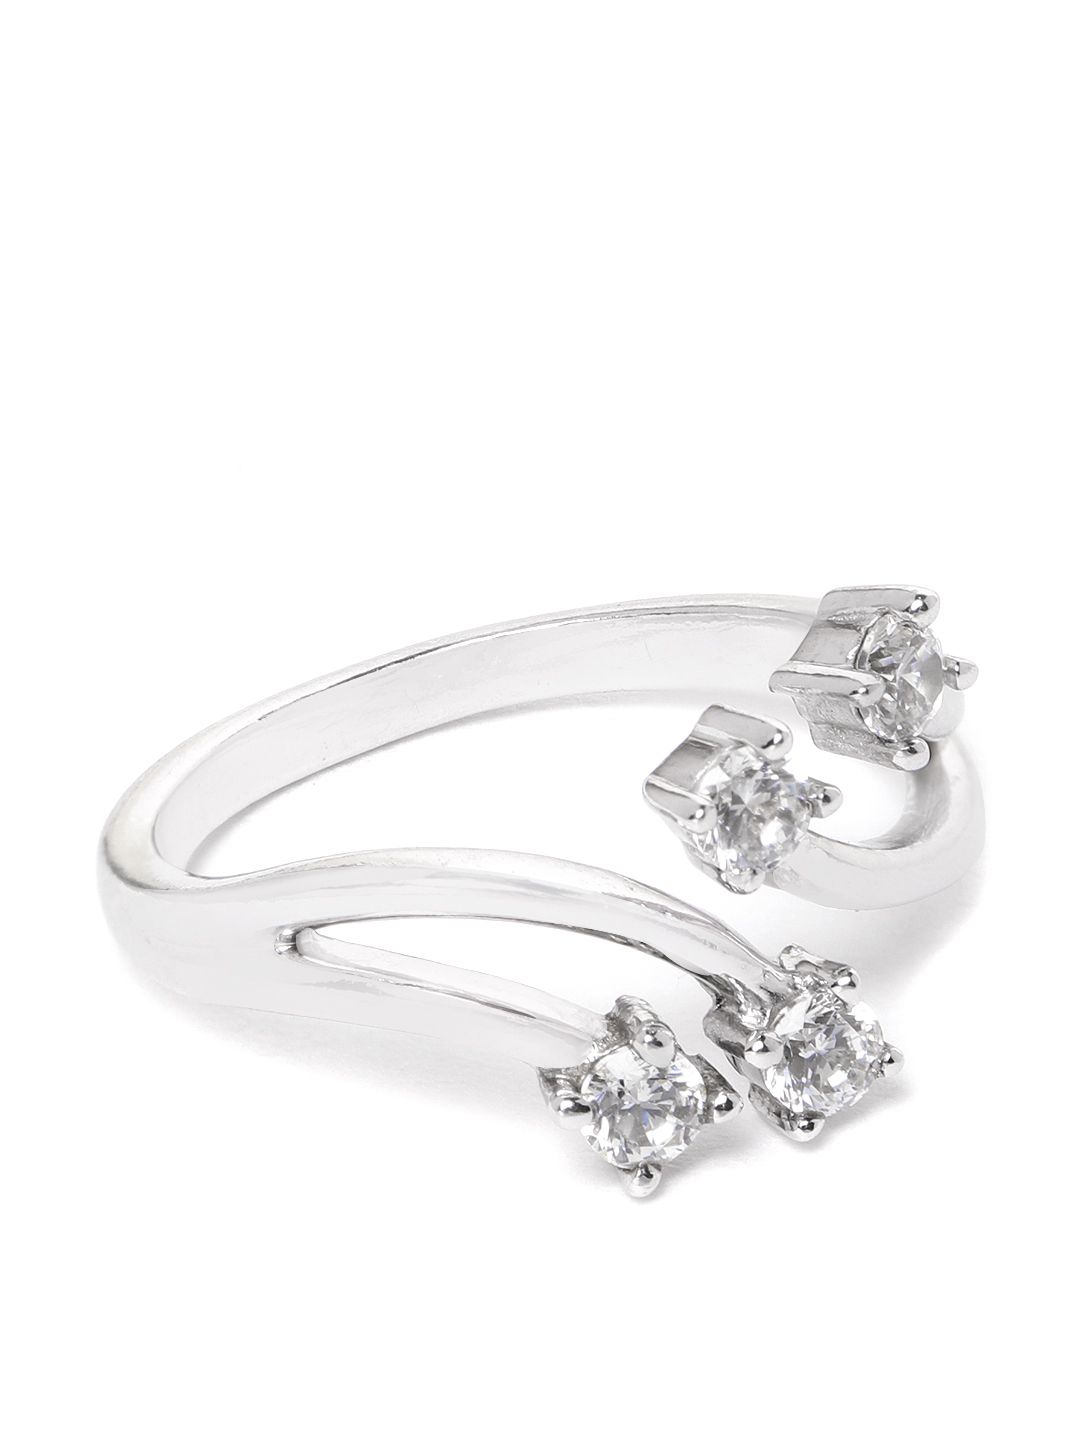 Carlton London Women Silver-Toned Rhodium-Plated CZ-Studded Adjustable Finger Ring Price in India